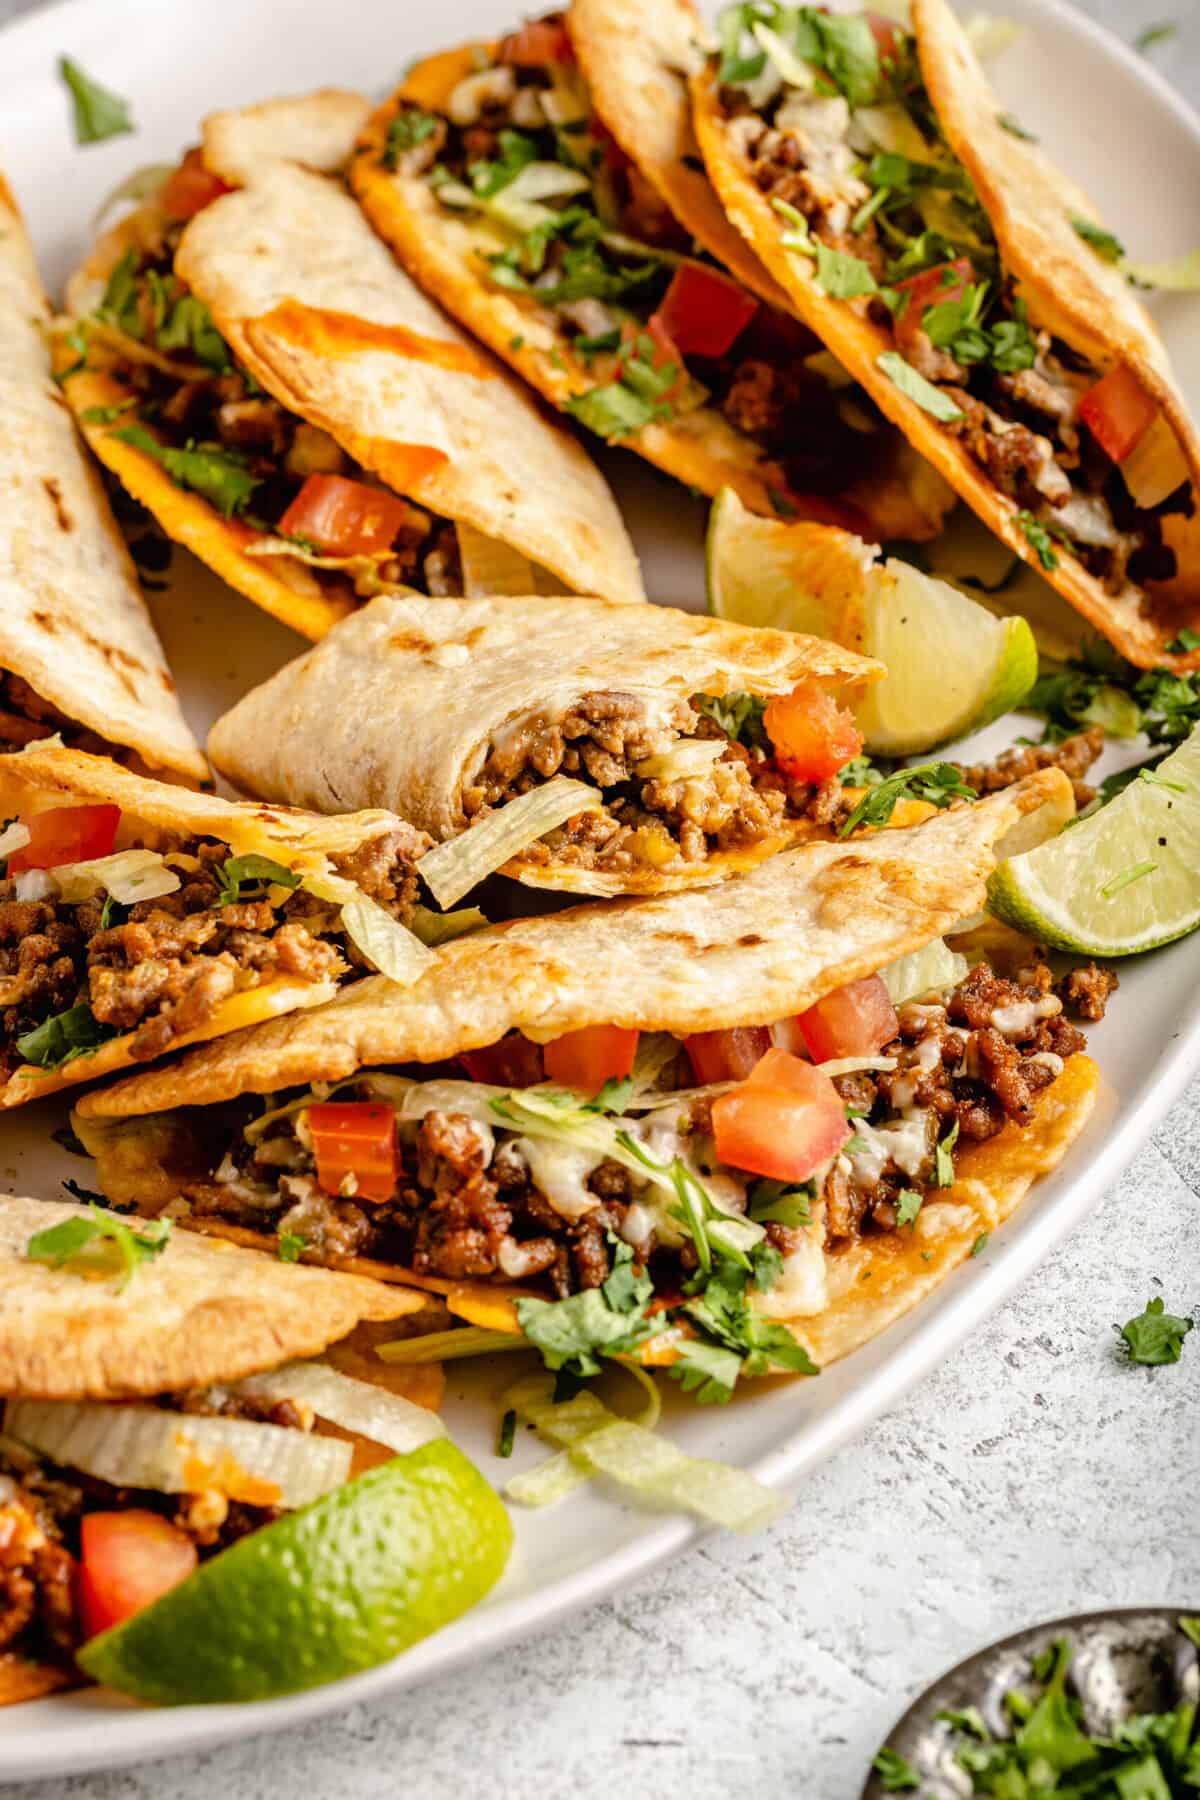 Crunchy Baked Beef Tacos